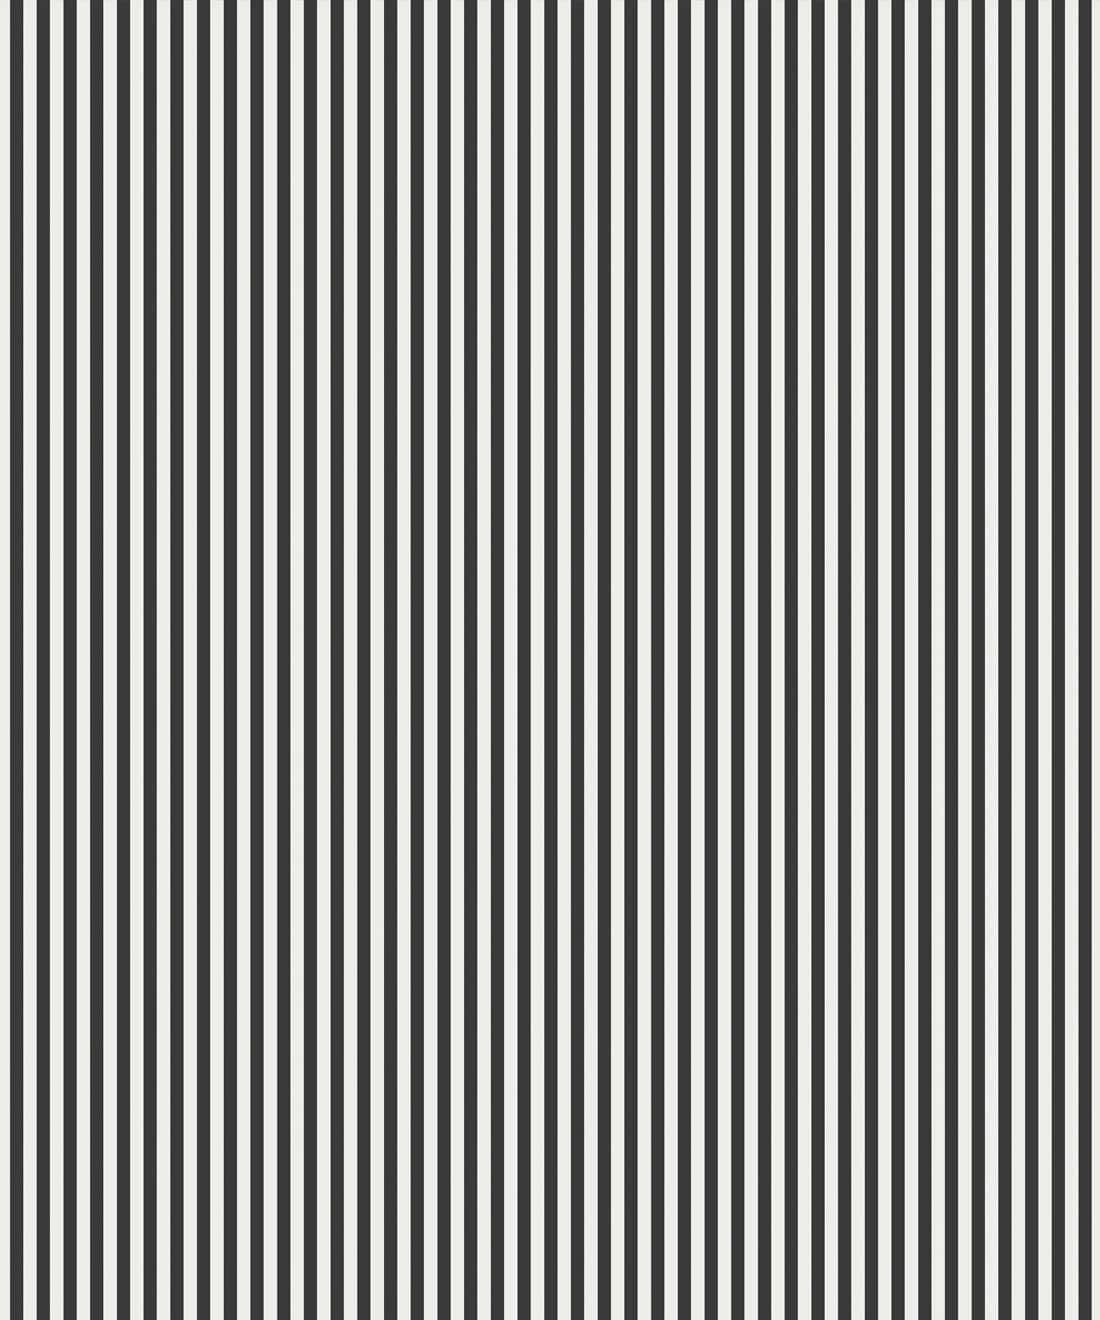 A classic black and white striped background